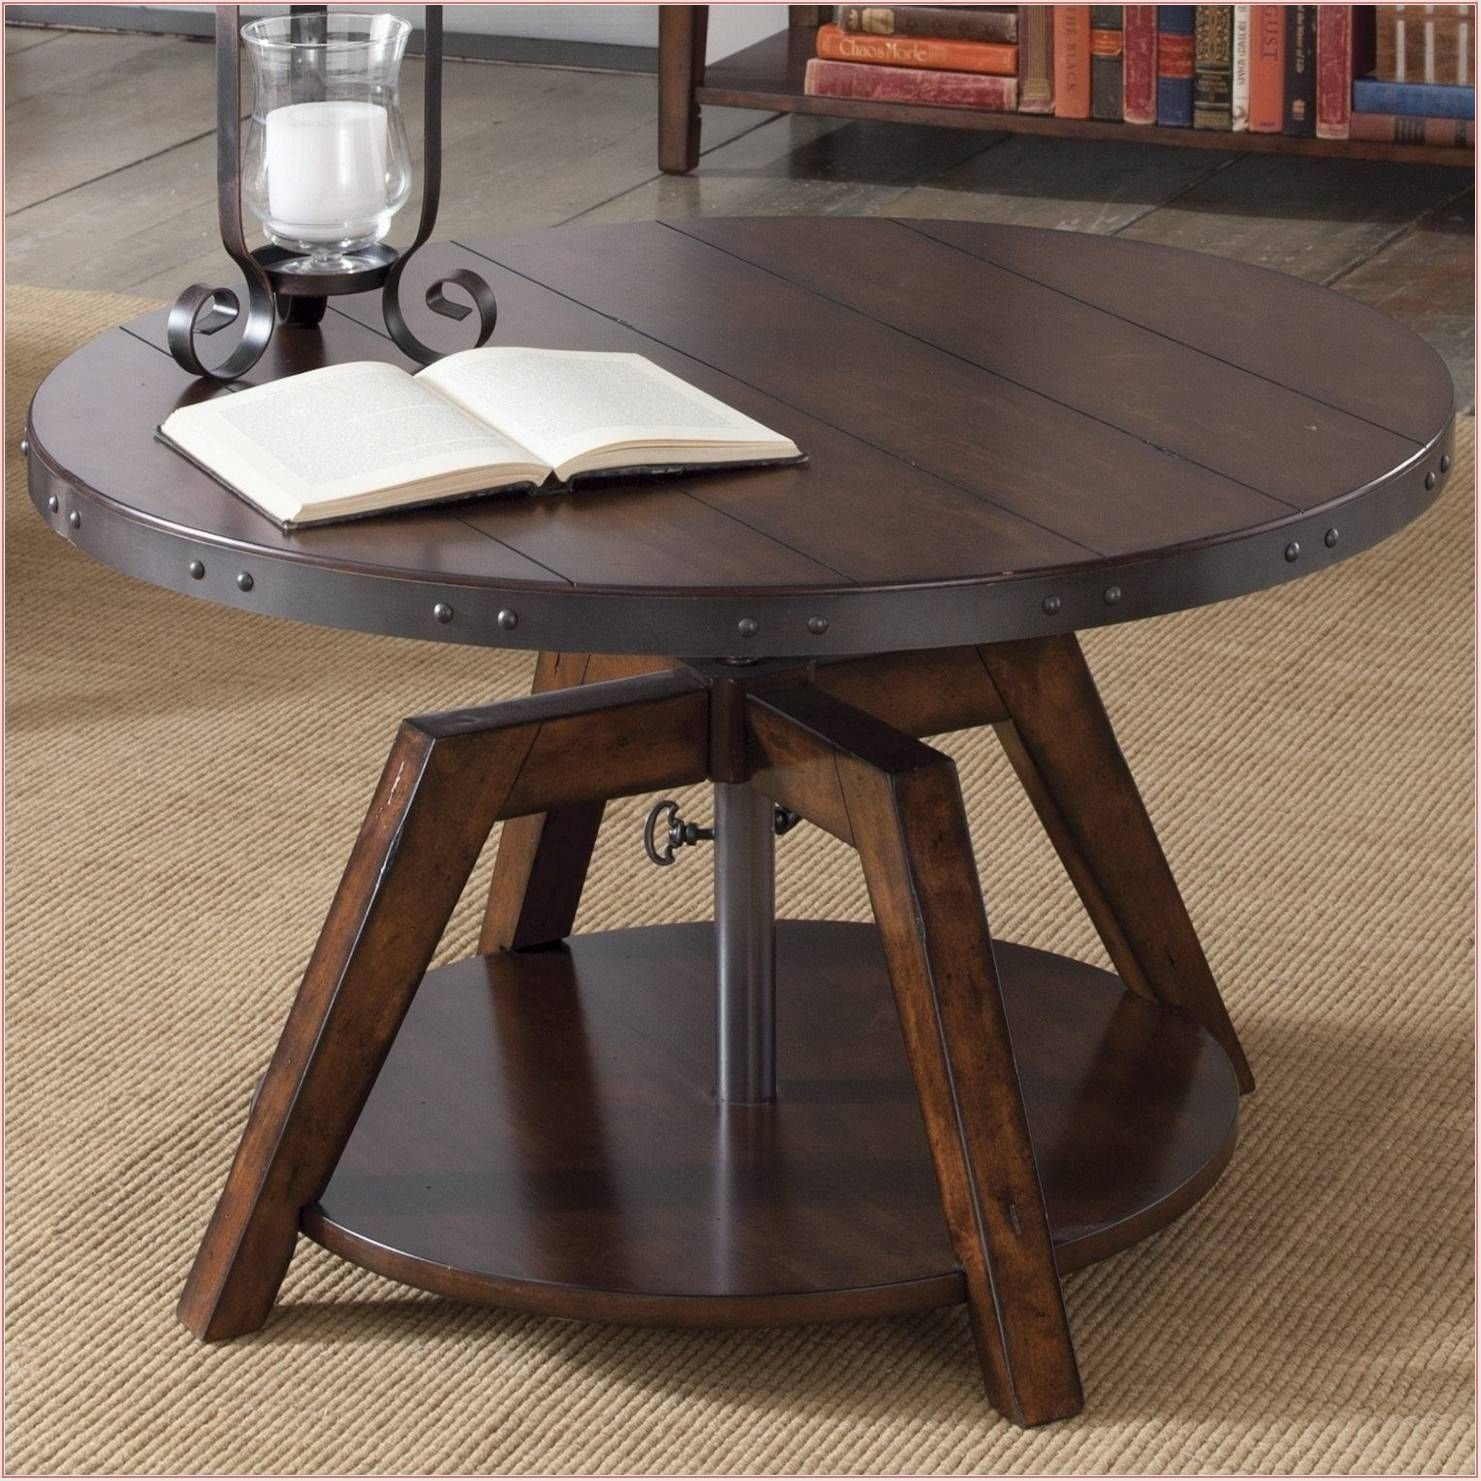 50 Amazing Convertible Coffee Table To Dining Table Up To 70 Off regarding dimensions 1481 X 1481